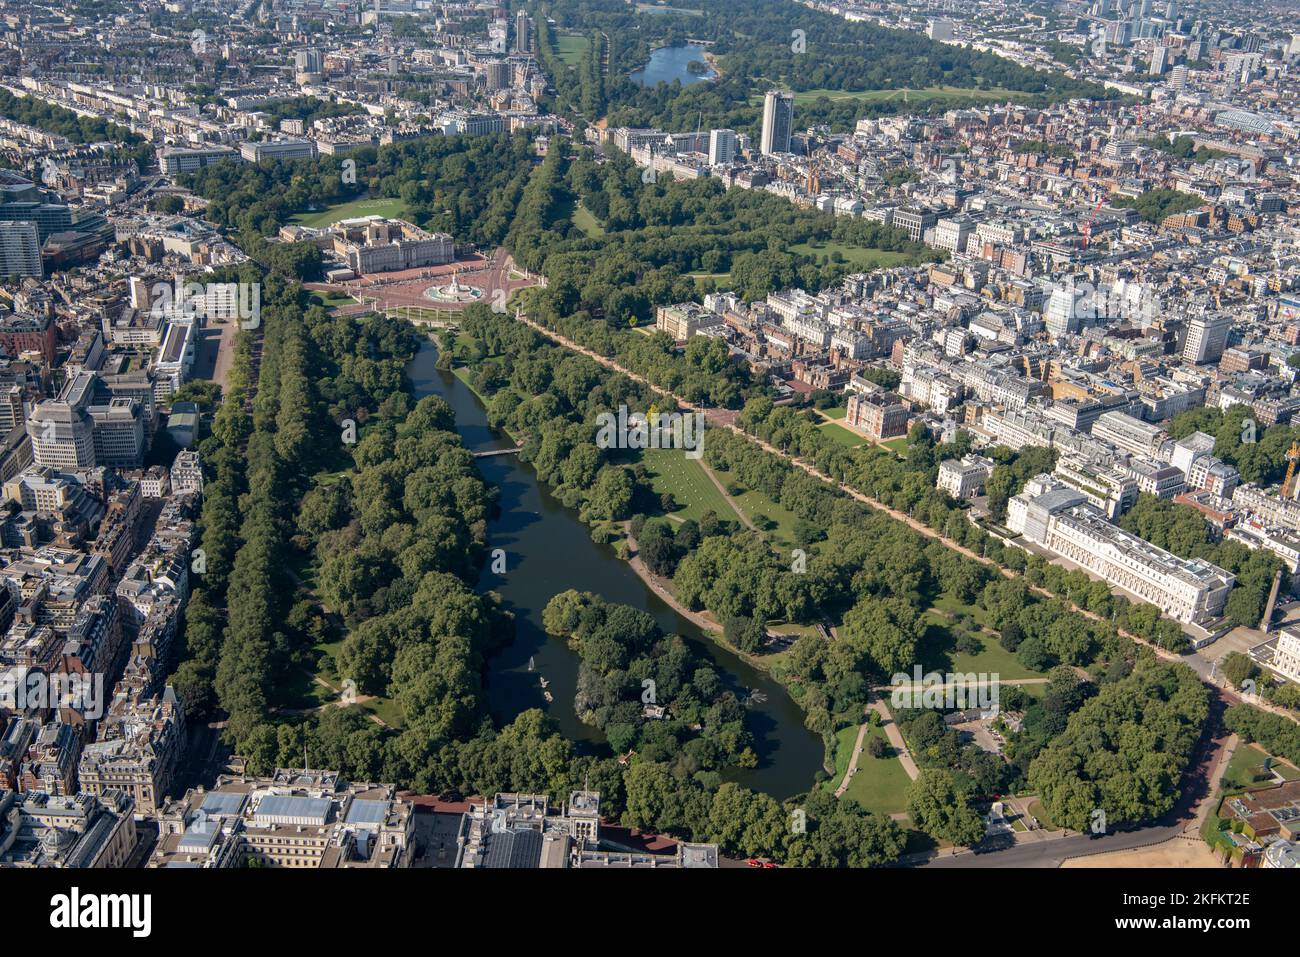 A view across St James' Park towards Buckingham Palace and Green Park, Westminster, Greater London Authority, 2021 . Stock Photo